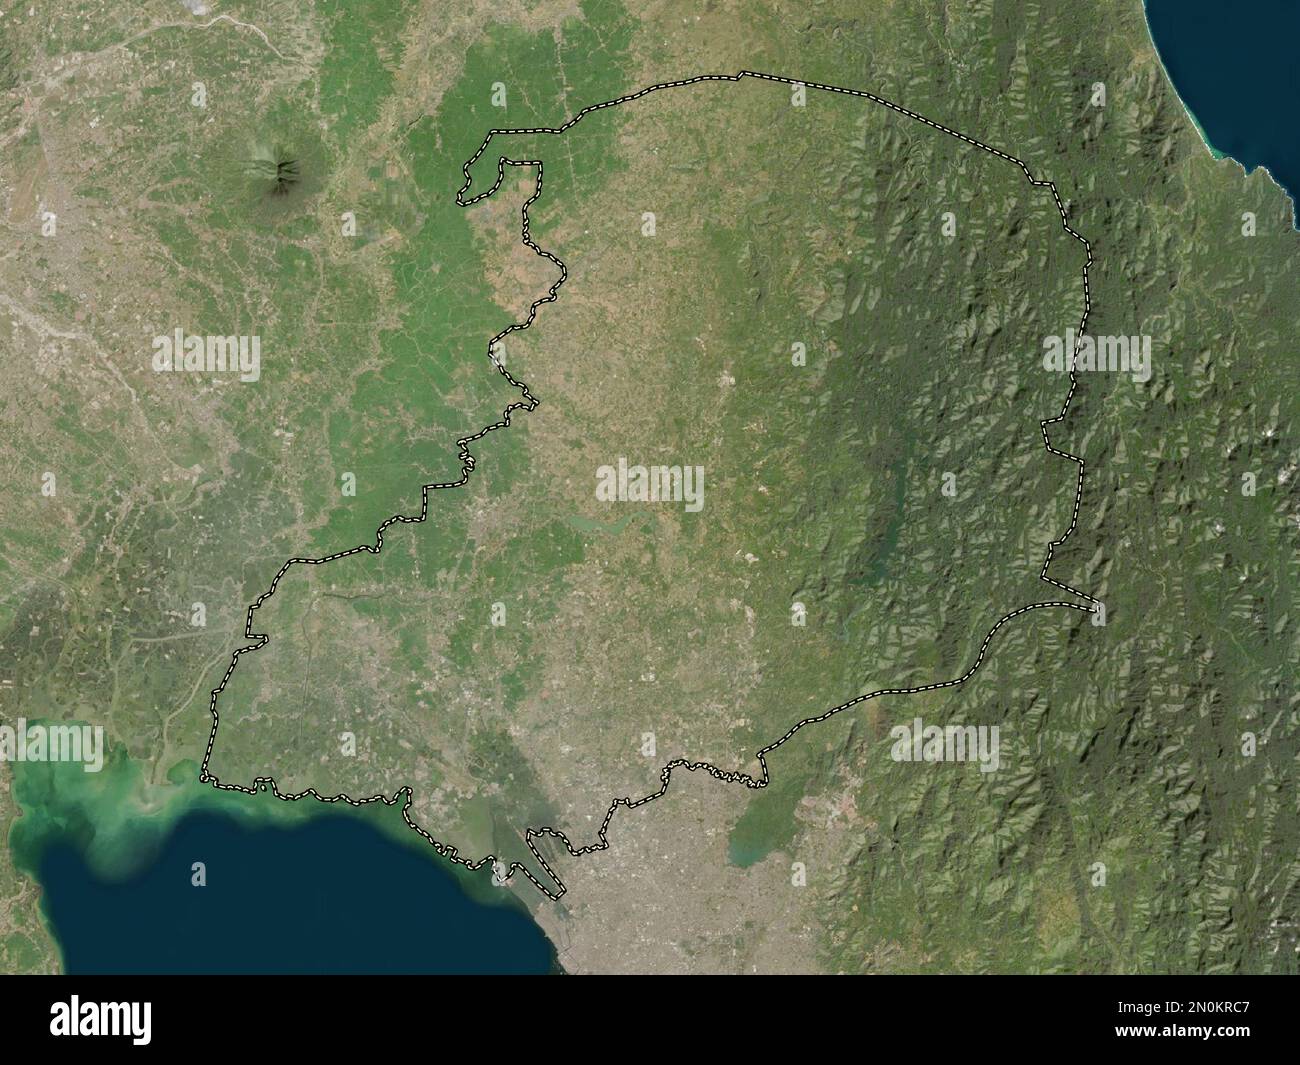 Bulacan, province of Philippines. Low resolution satellite map Stock Photo